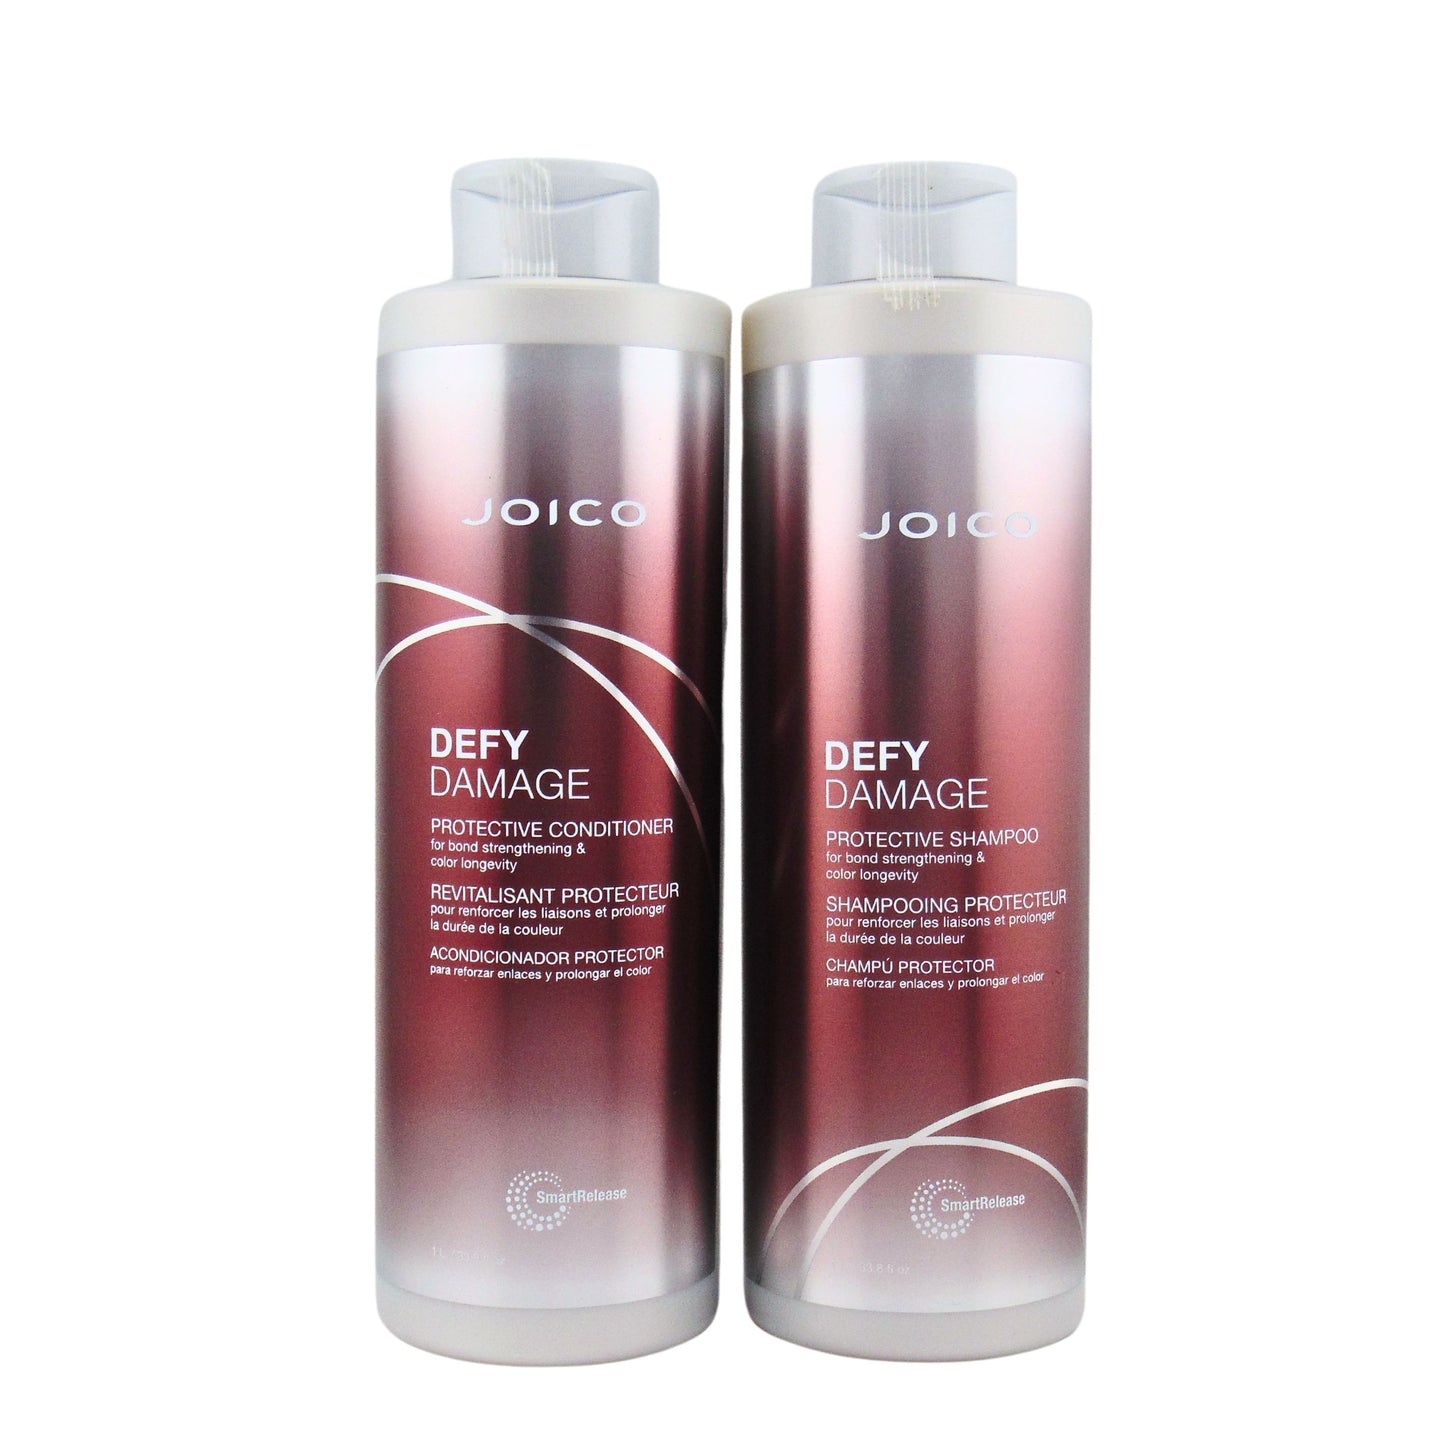 Joico Defy Damage Duo (Protective Shampoo and Conditioner)